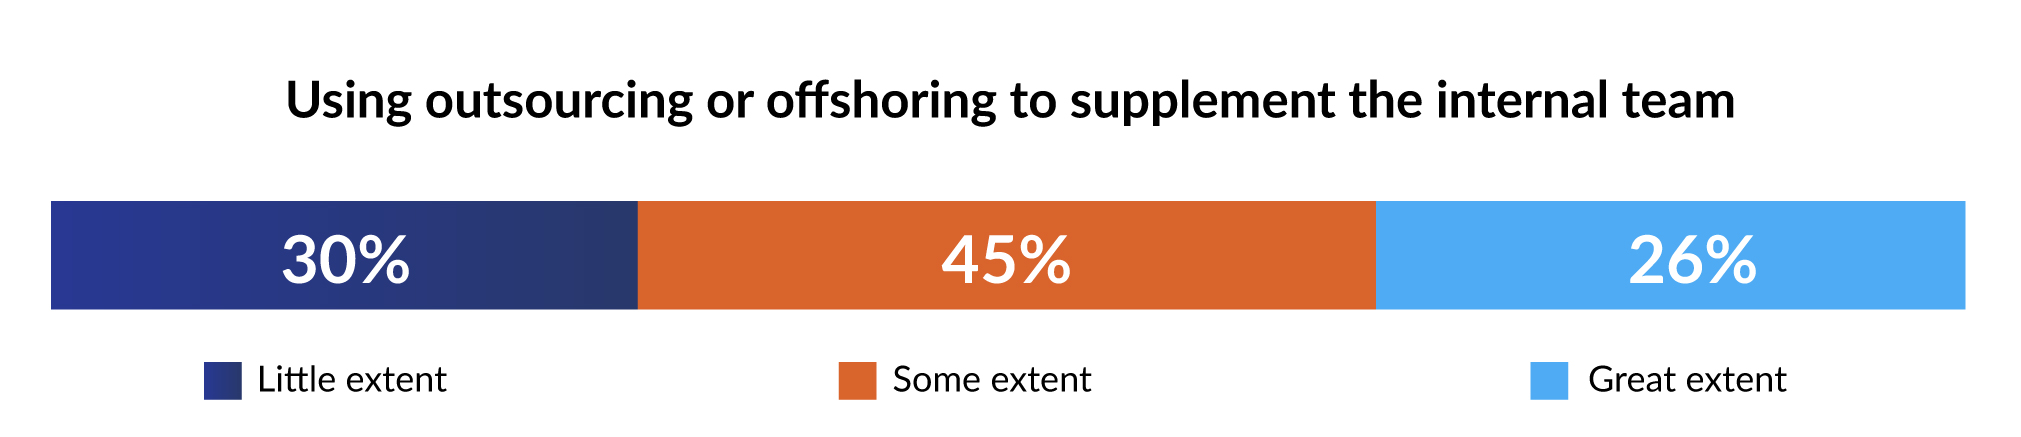 Infographic showing share of companies that use IT outsourcing to support internal teams